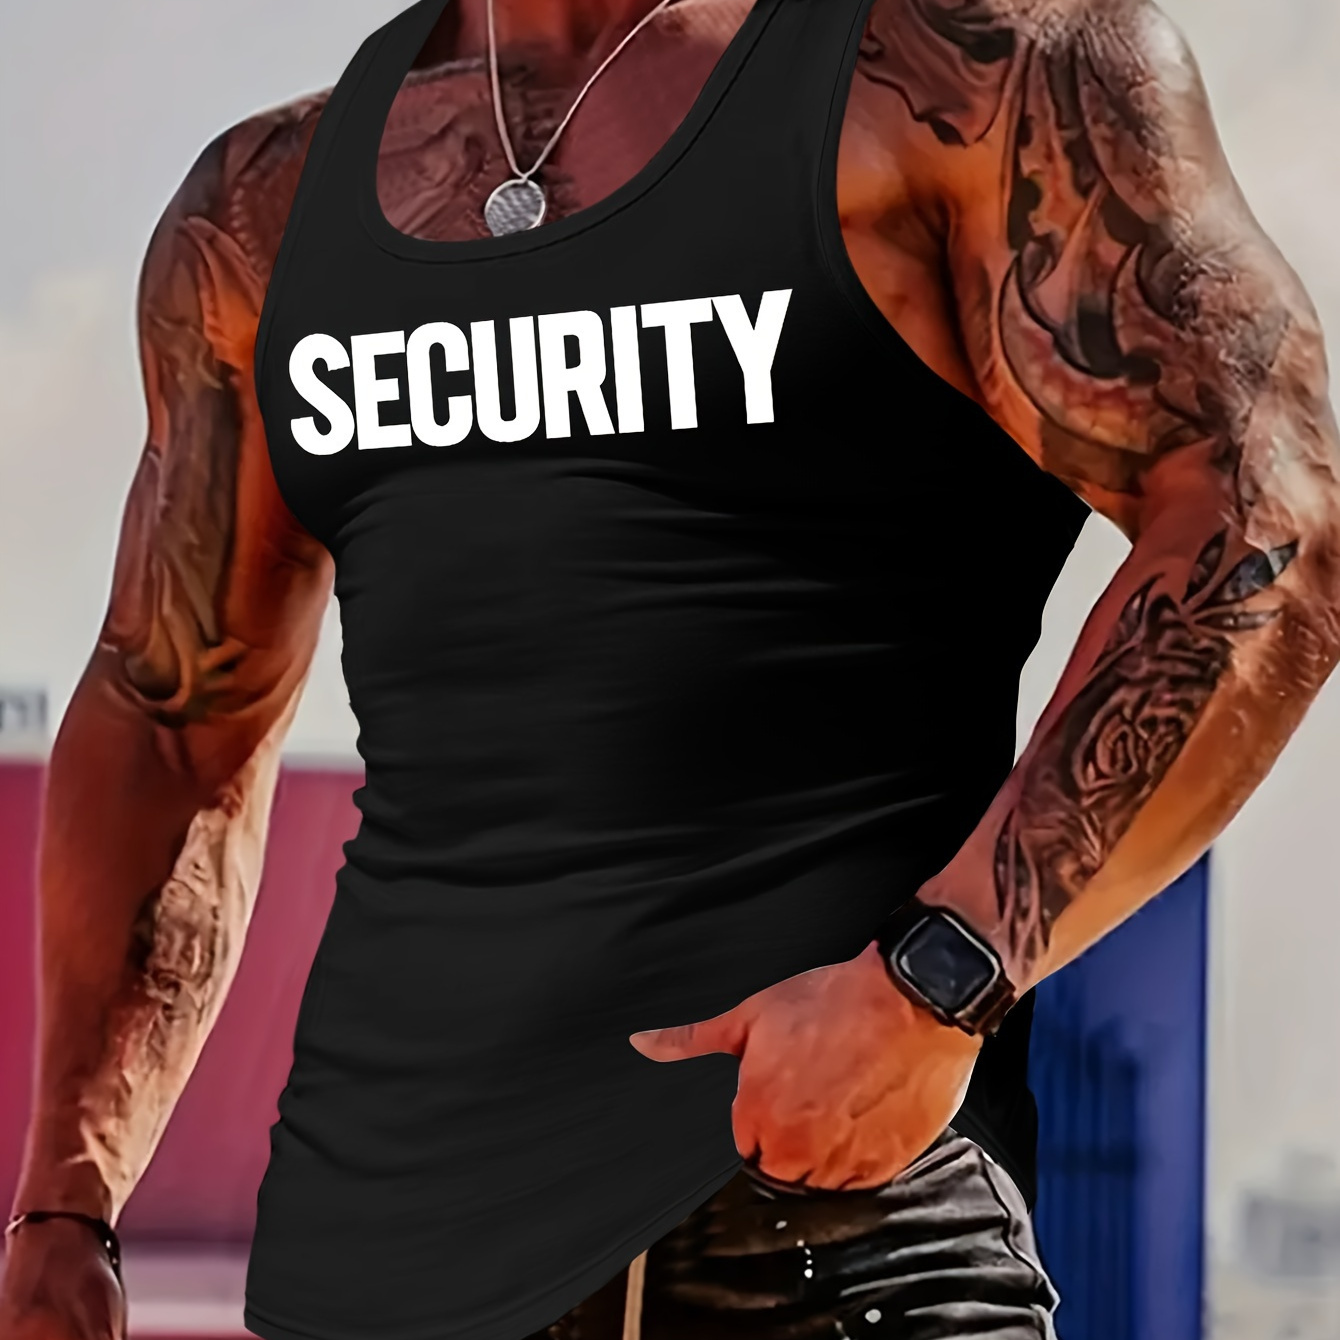 

Security Print, Men's Quick Dry Moisture-wicking Breathable Tank Tops, Athletic Gym Bodybuilding Sports Sleeveless Shirts, Men's Top For Workout Running Training Basketball Playing, Men's Clothing